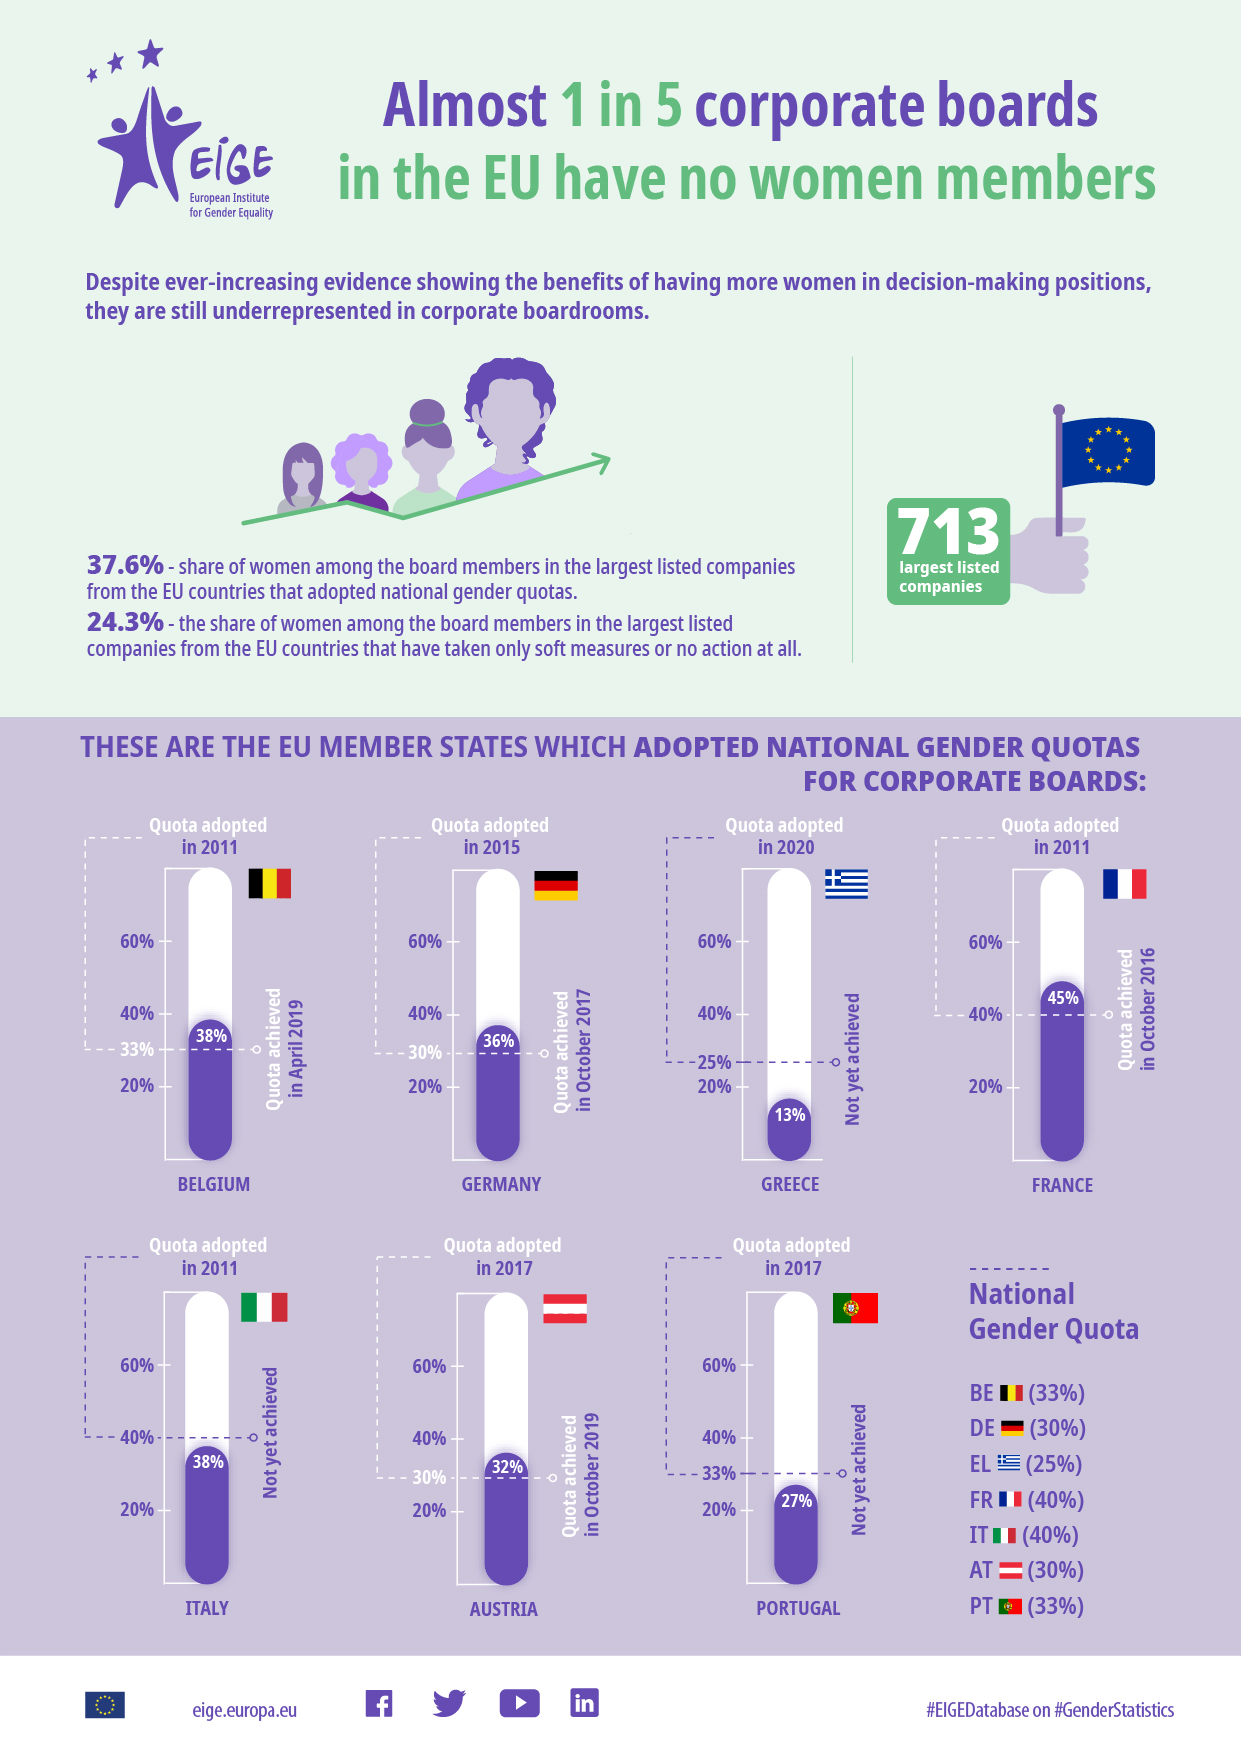  Almost 1 in 5 corporate boards in the EU have no women members